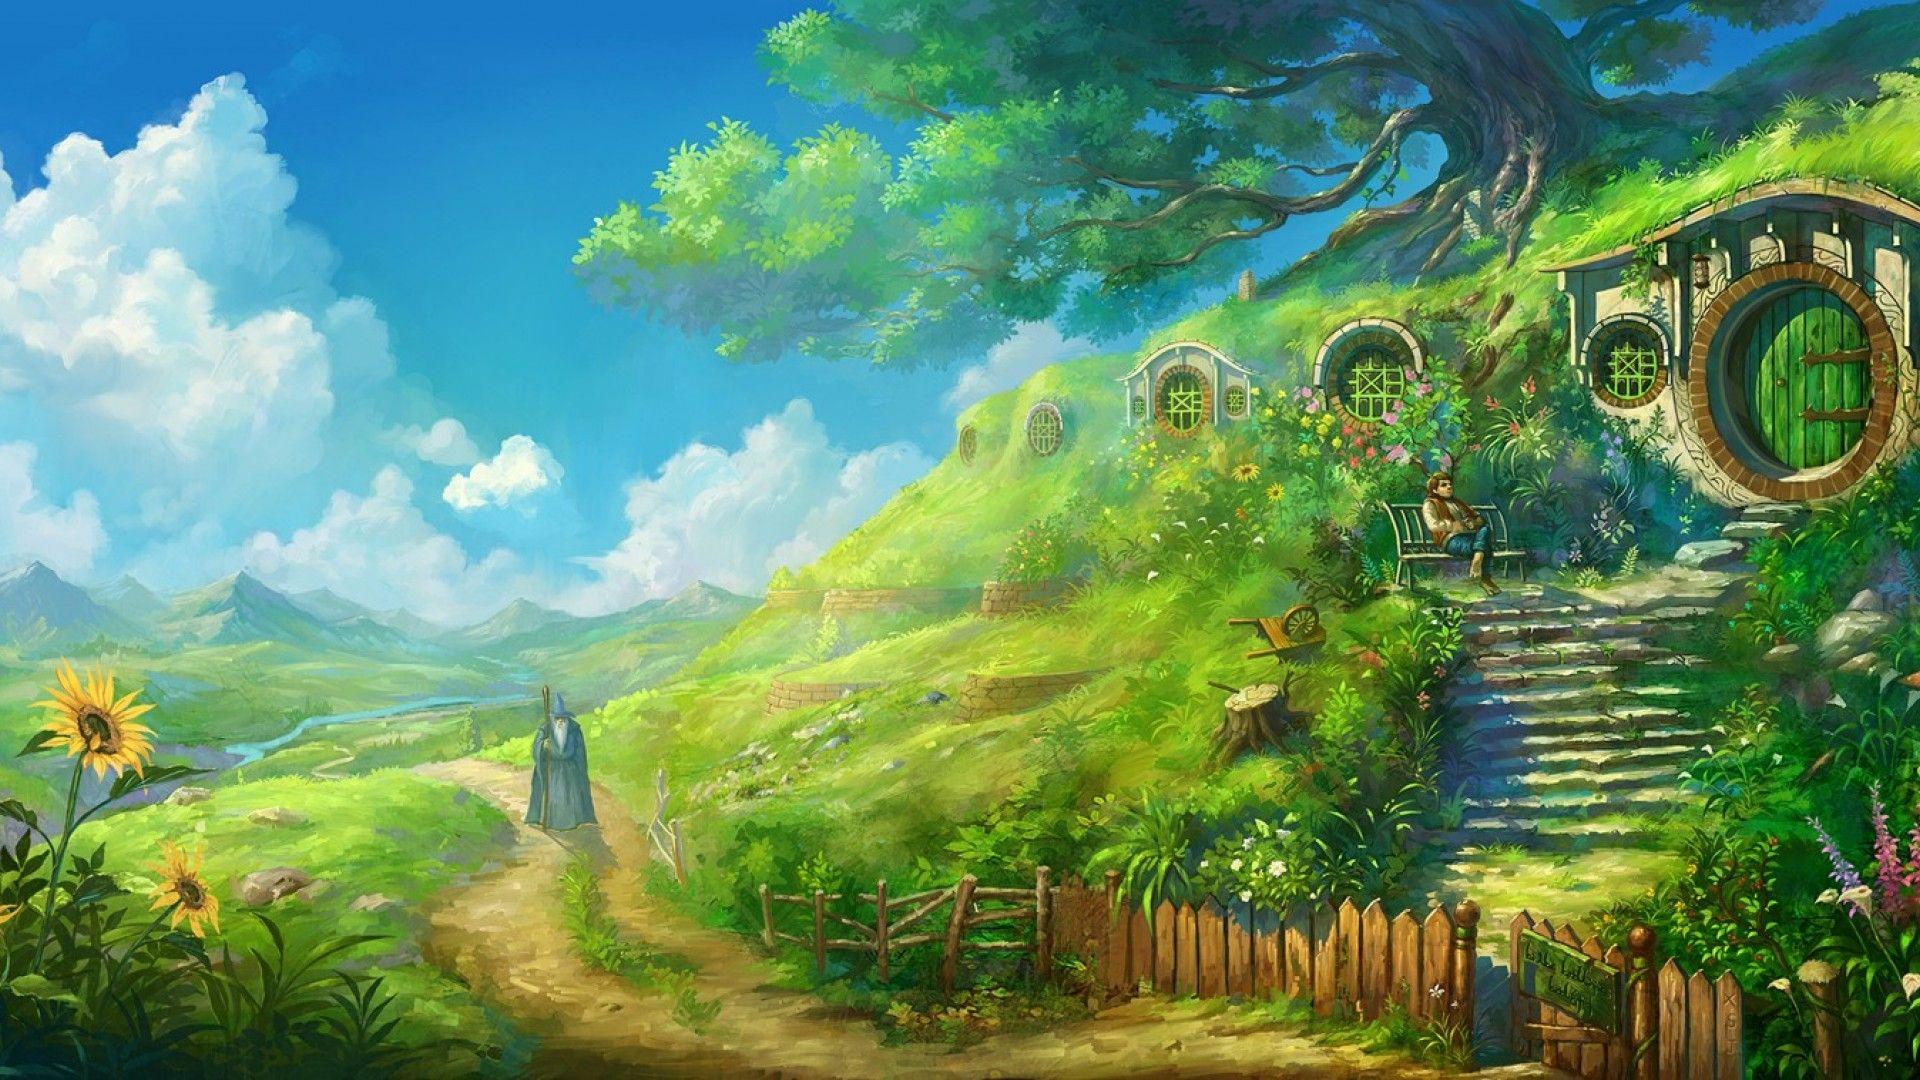 Shire Wallpapers - Wallpaper Cave